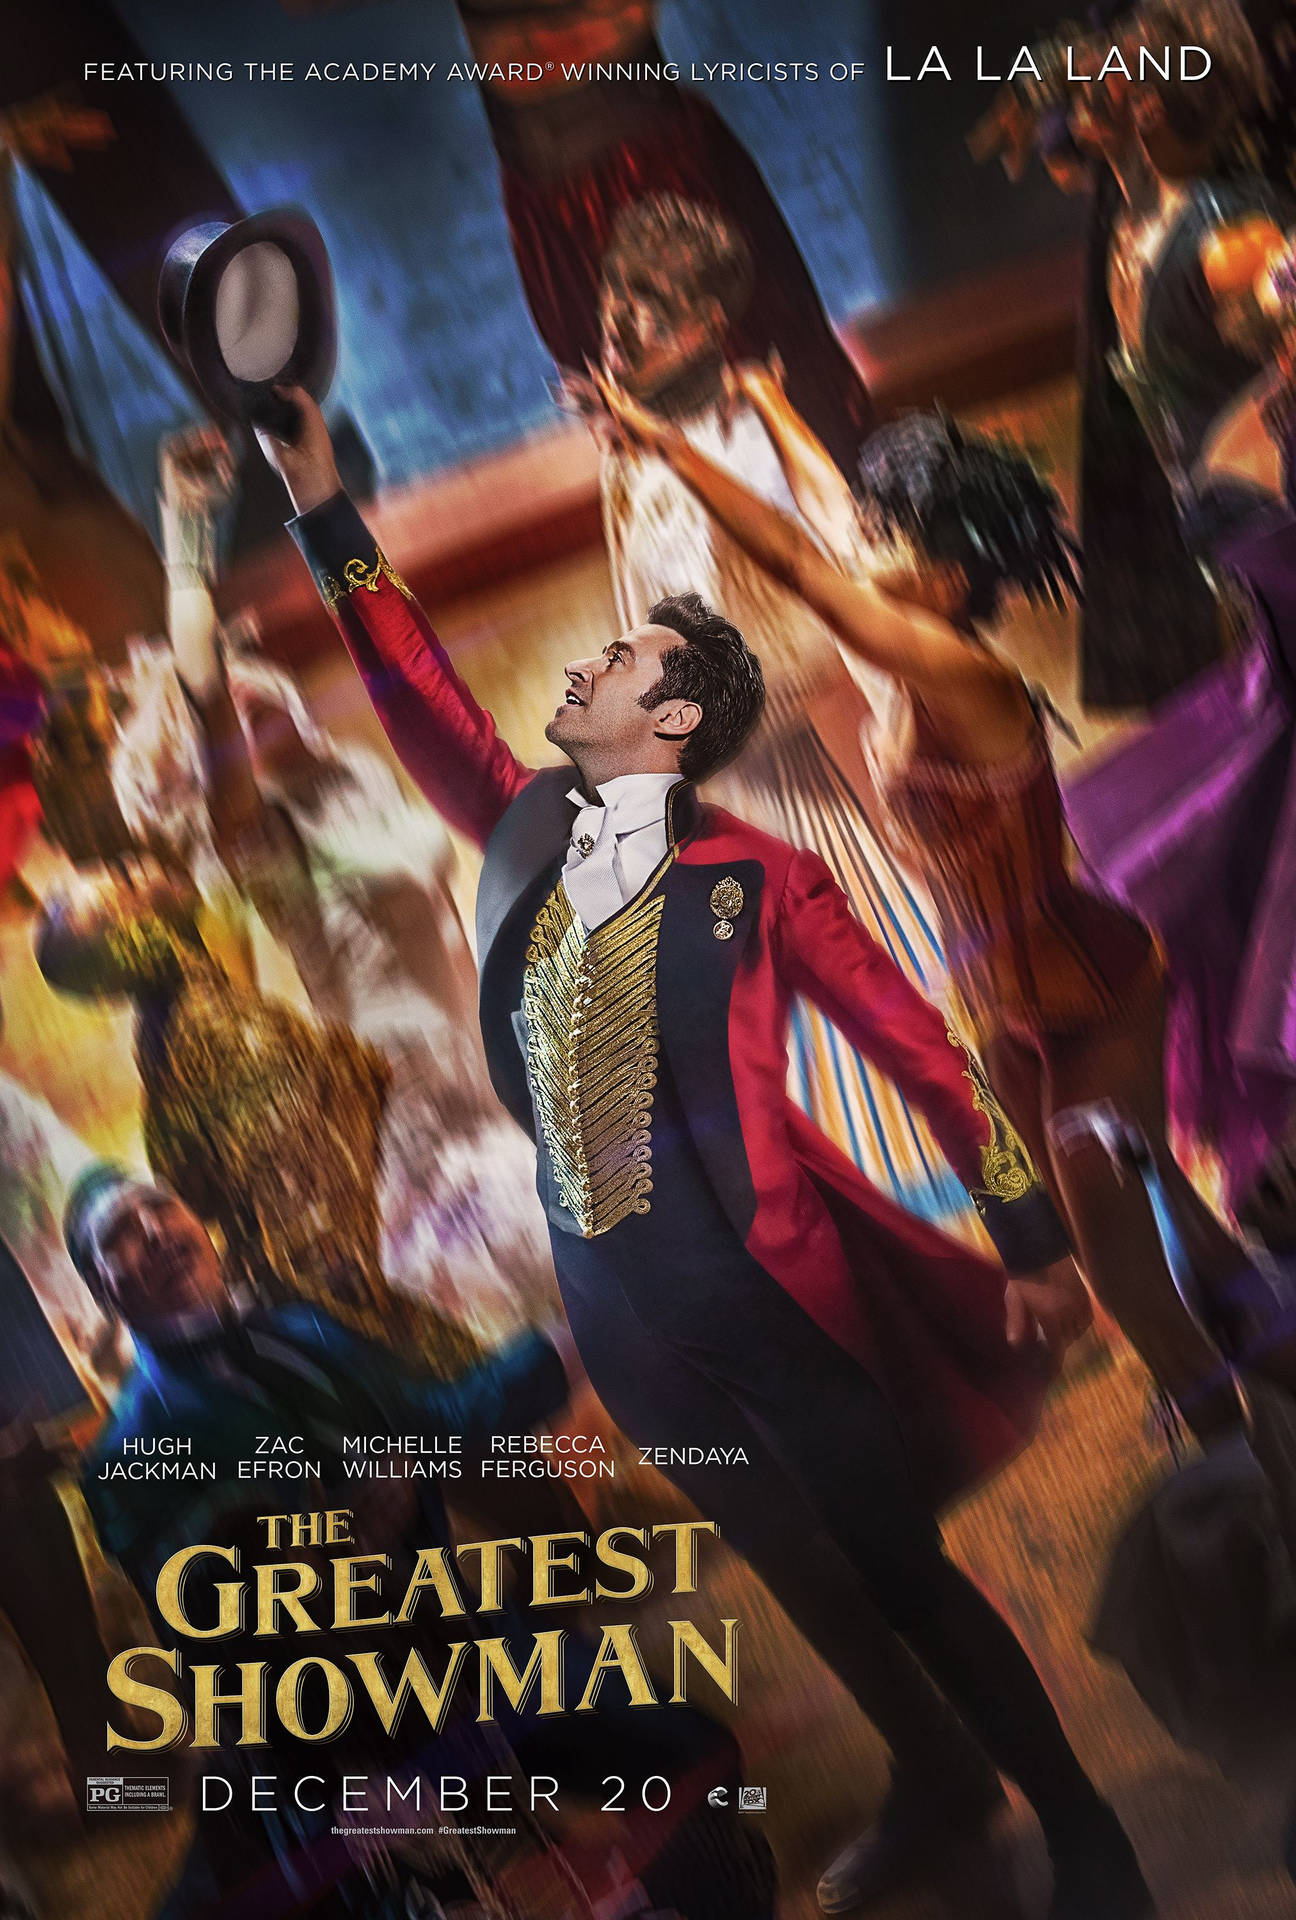 Painted Art Of The Greatest Showman